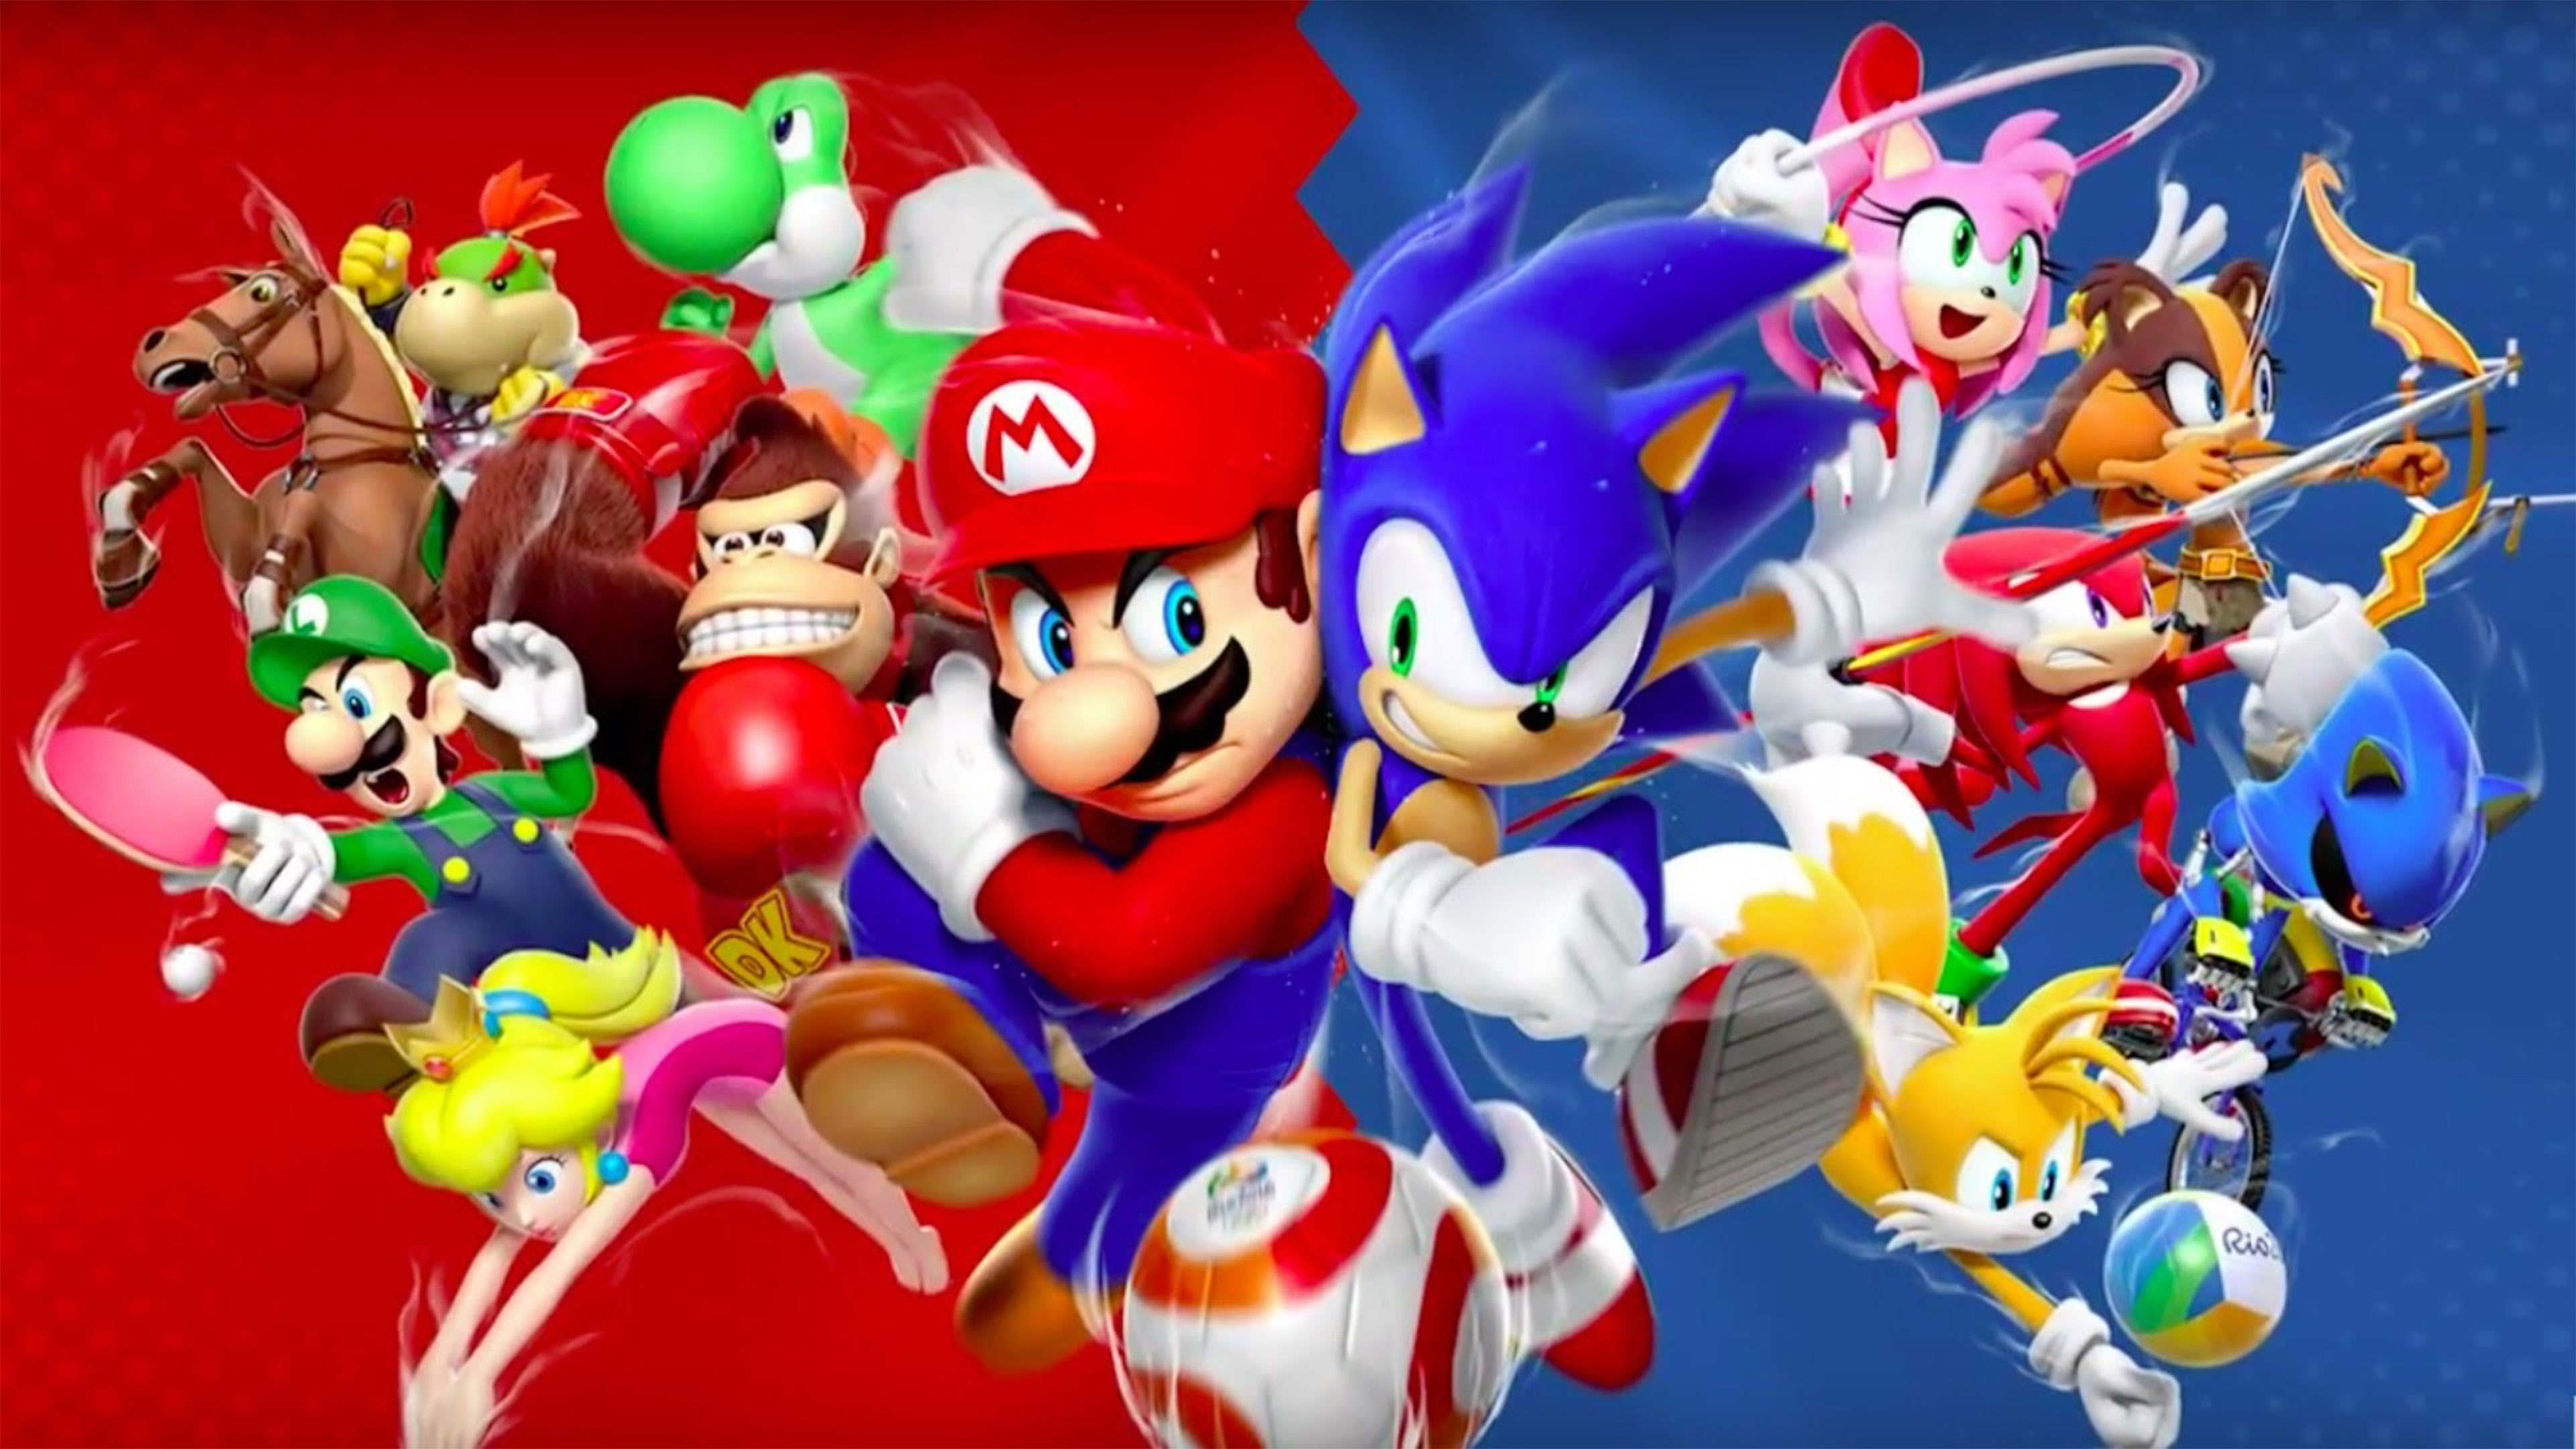 Mario And Sonic At The Rio 16 Olympic Games Wallpapers In Ultra Hd 4k Gameranx